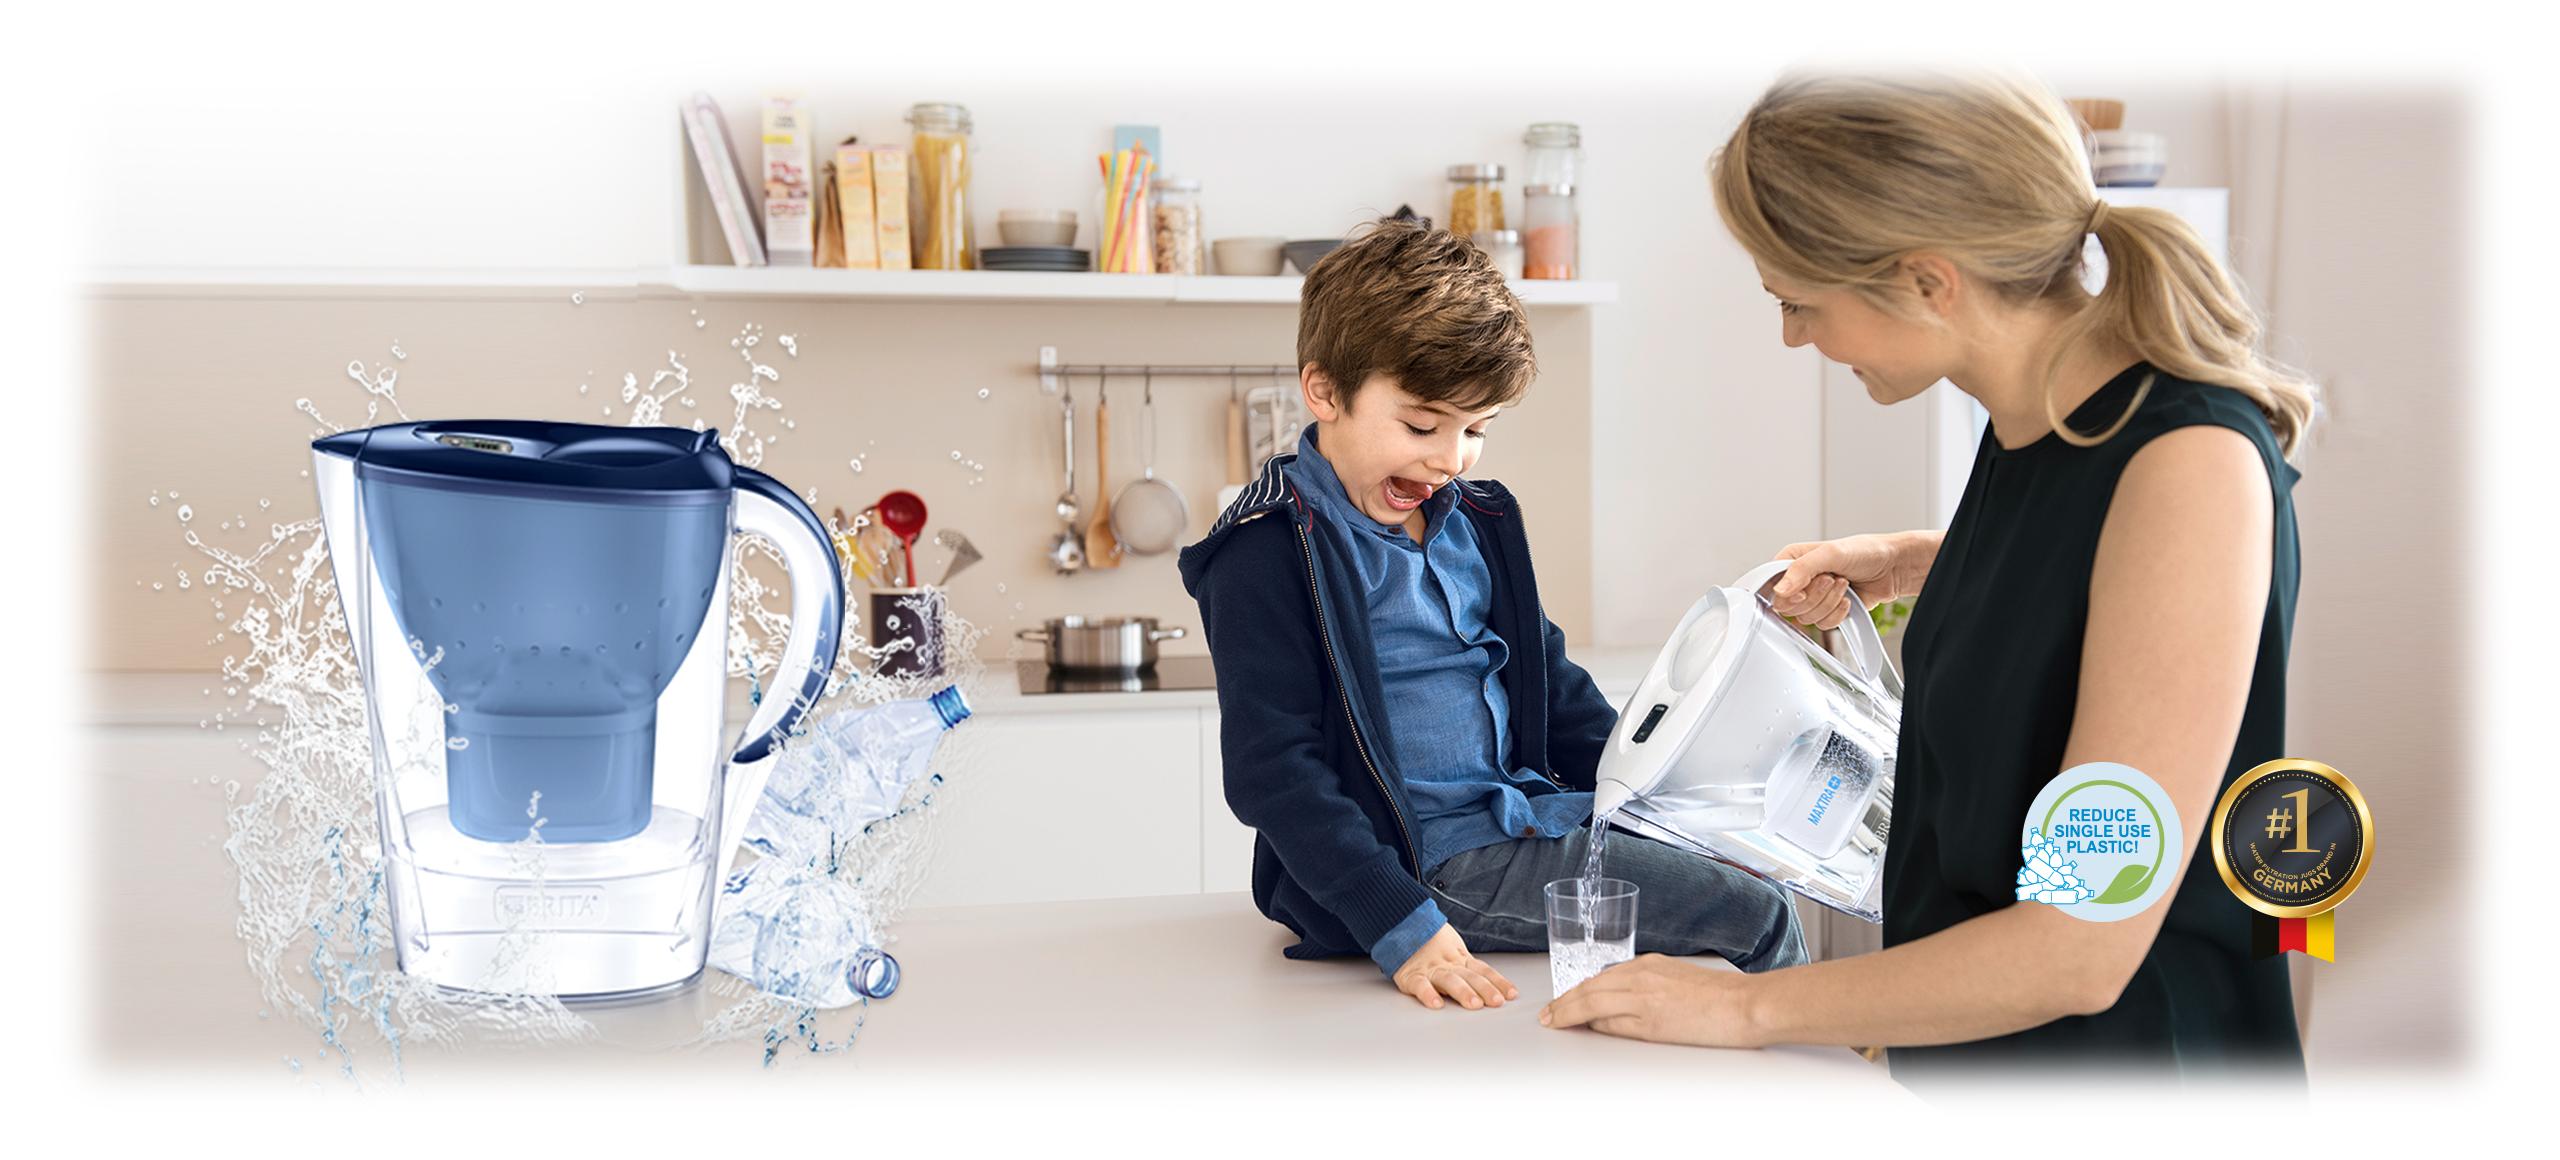 BRITA filter jug and woman with child in kitchen